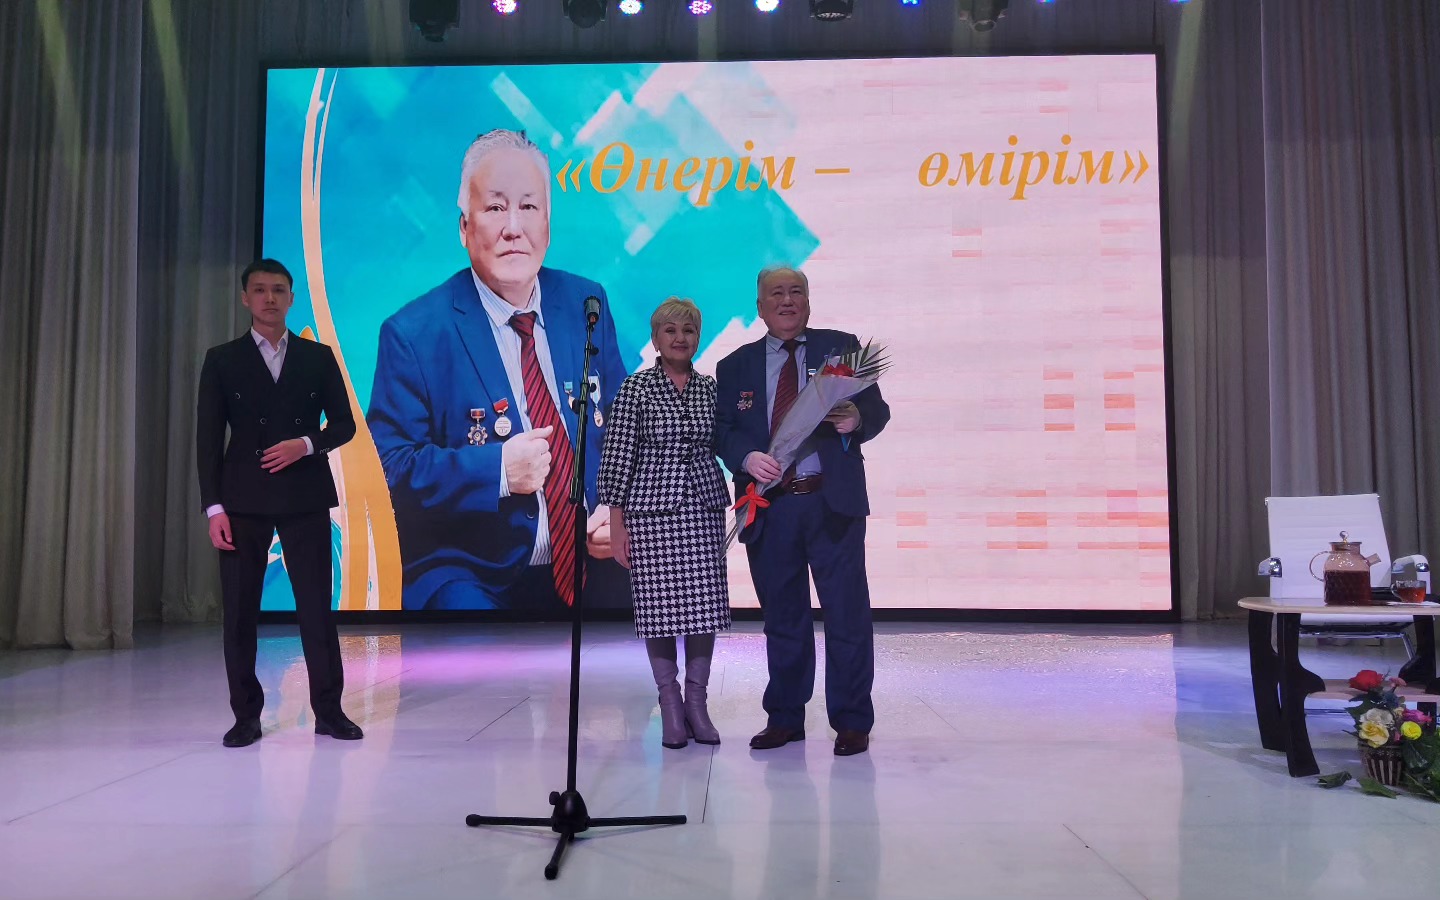 The creative evening "Onerim-omirim" of the Cultural worker of the Republic of Kazakhstan, honorary citizen of the Republic of Kazakhstan Token Ilyas took place